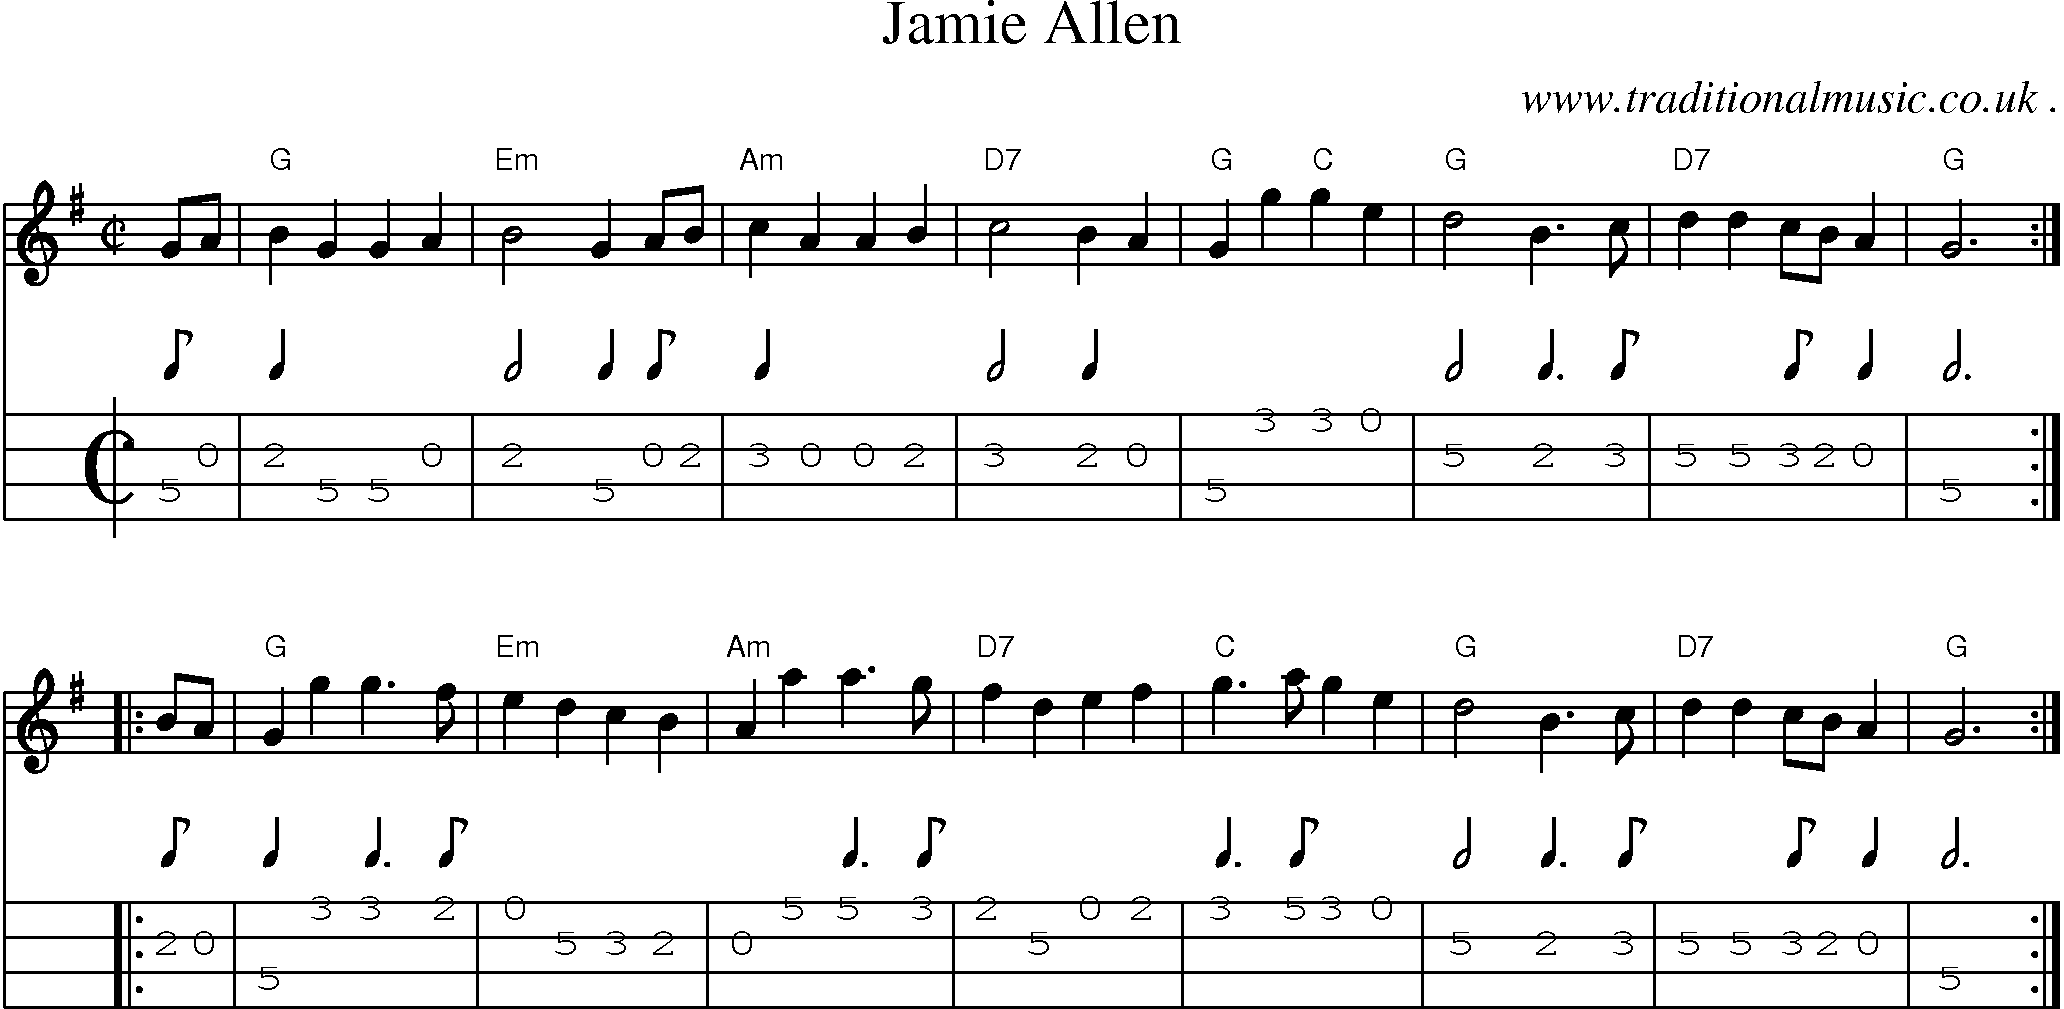 Sheet-music  score, Chords and Mandolin Tabs for Jamie Allen